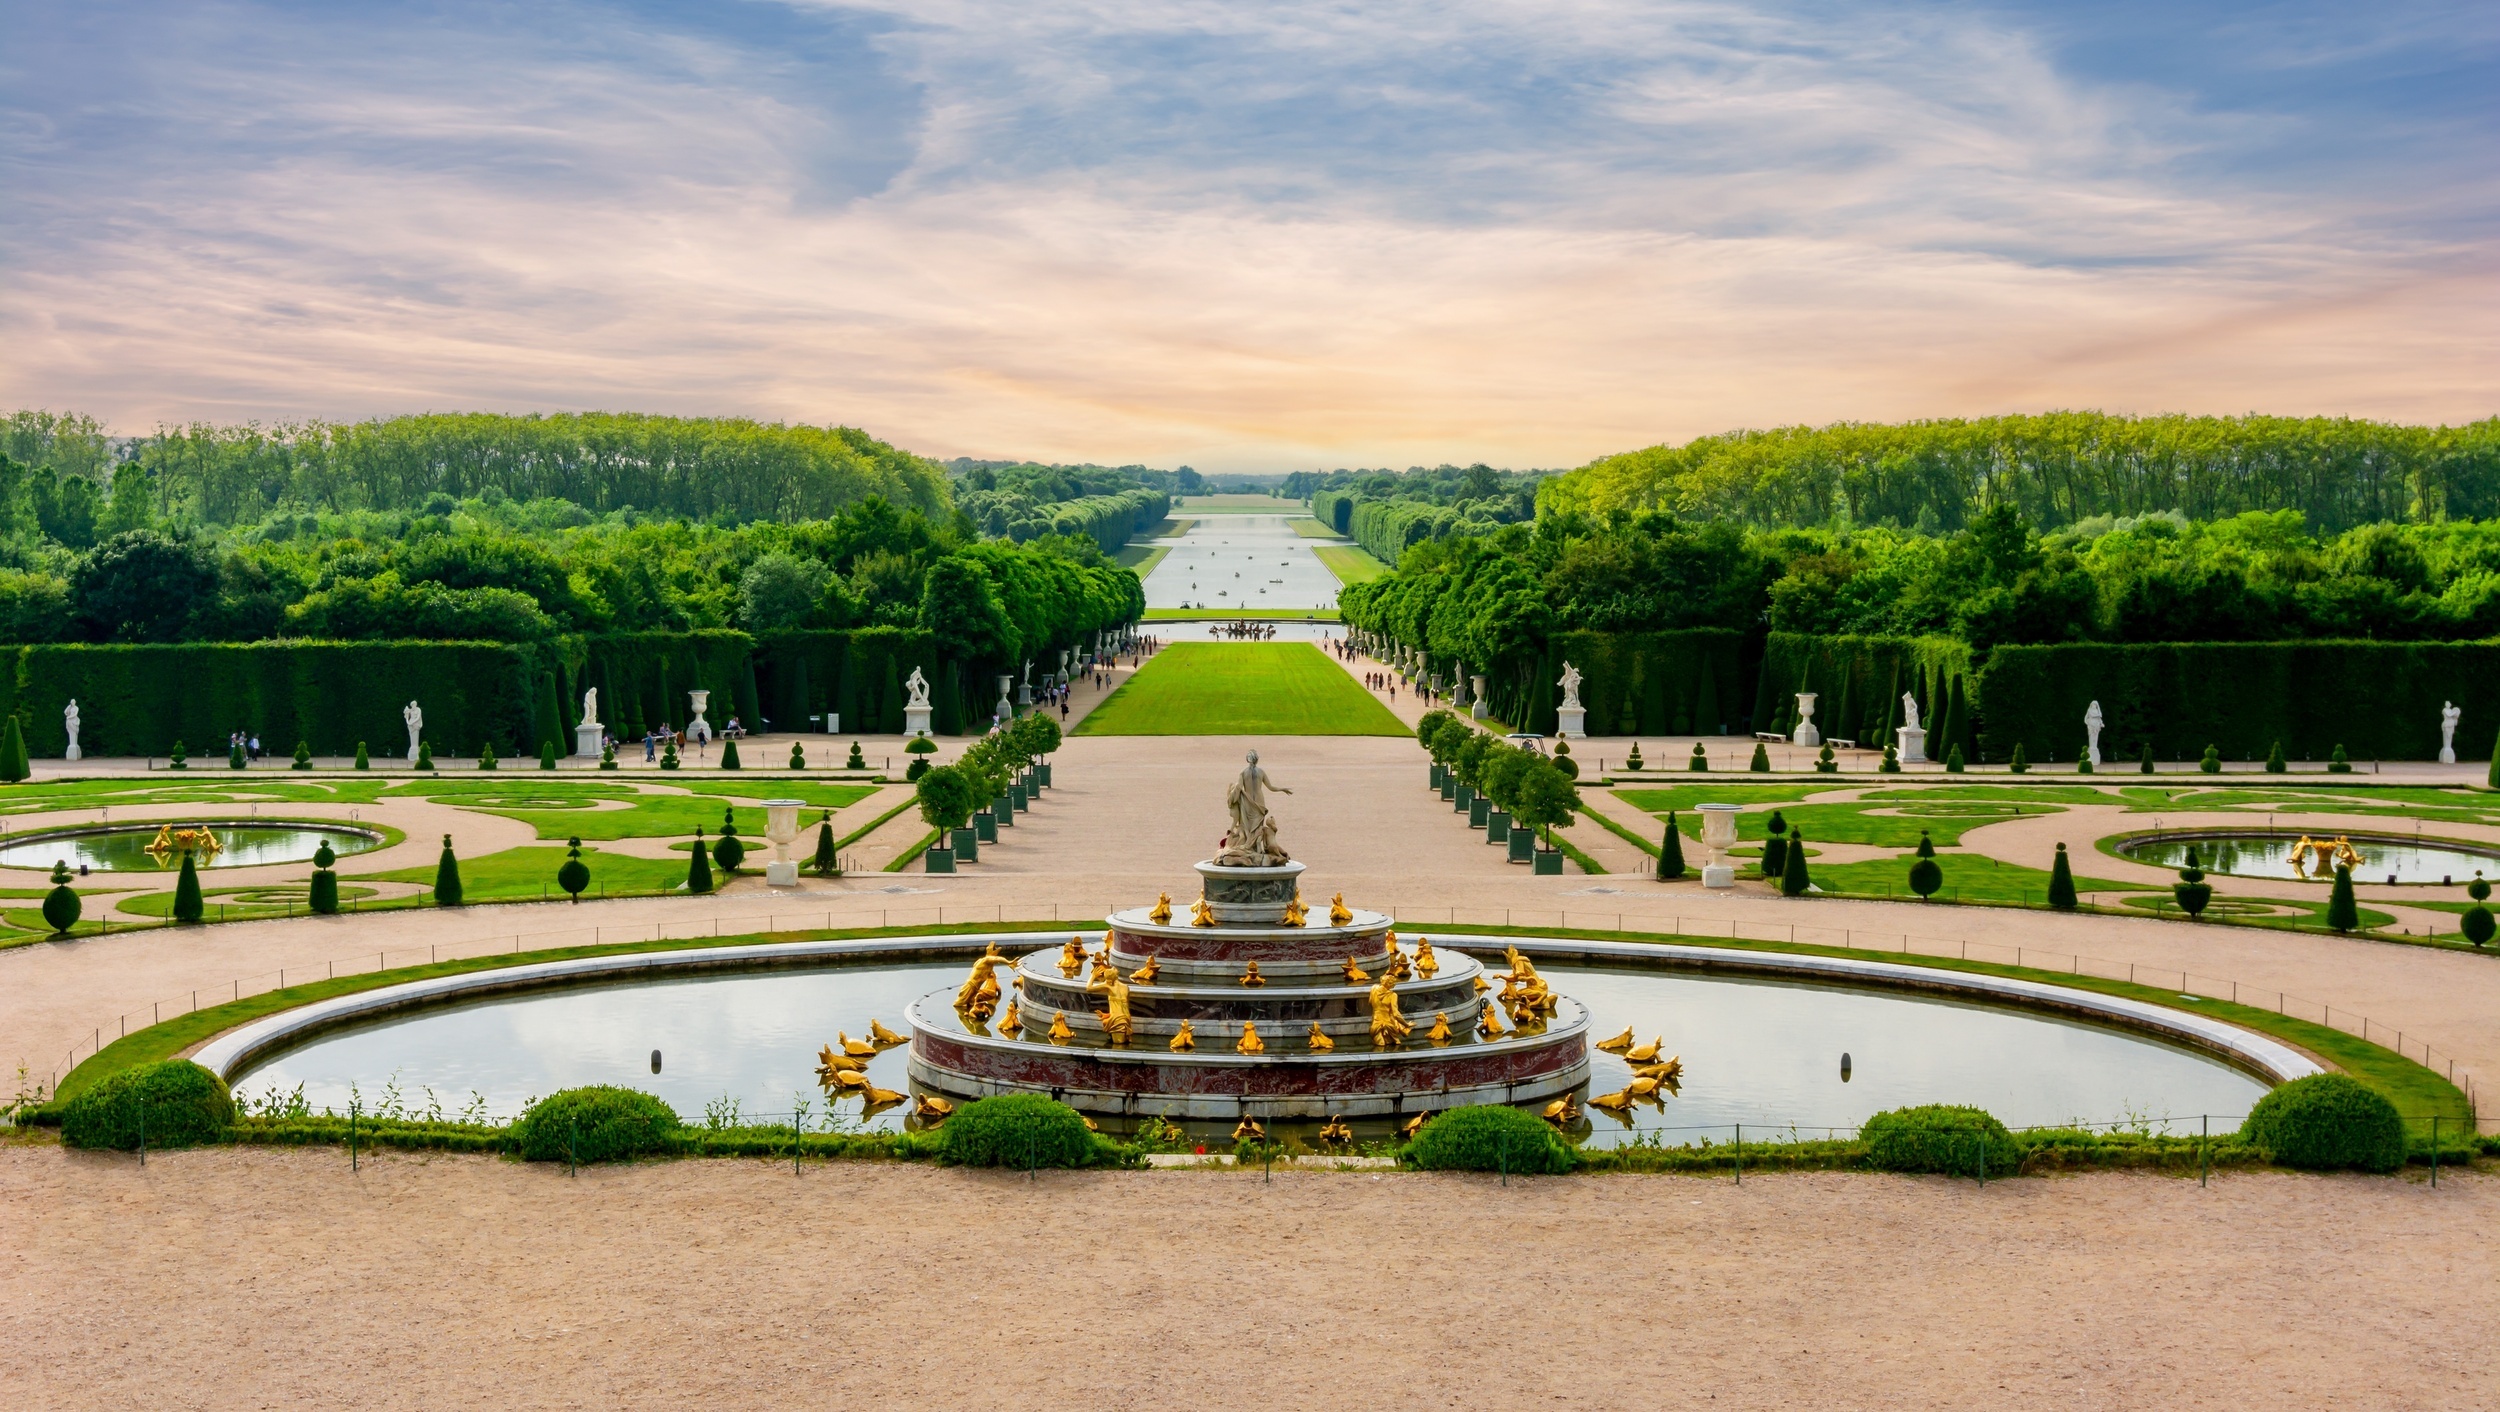 <p>Paris is a dream destination for many. Most visitors understandably prioritize the Louvre and Eiffel Tower. However, there is so much more to do in and around the city. Here are 20 amazing places to visit on your next trip.</p>